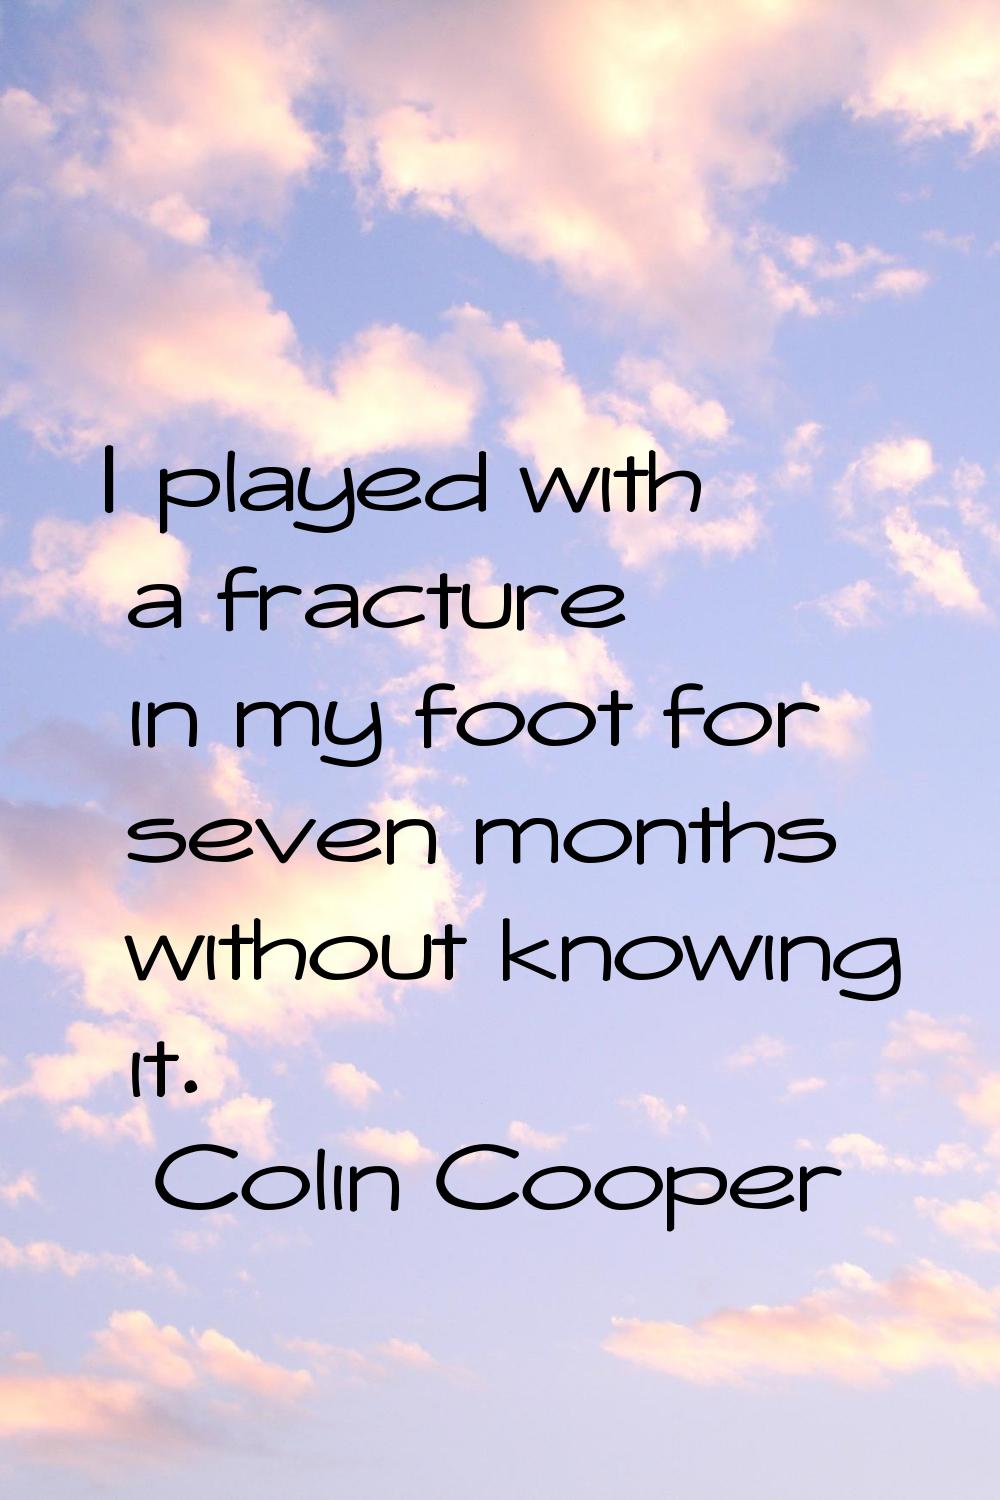 I played with a fracture in my foot for seven months without knowing it.